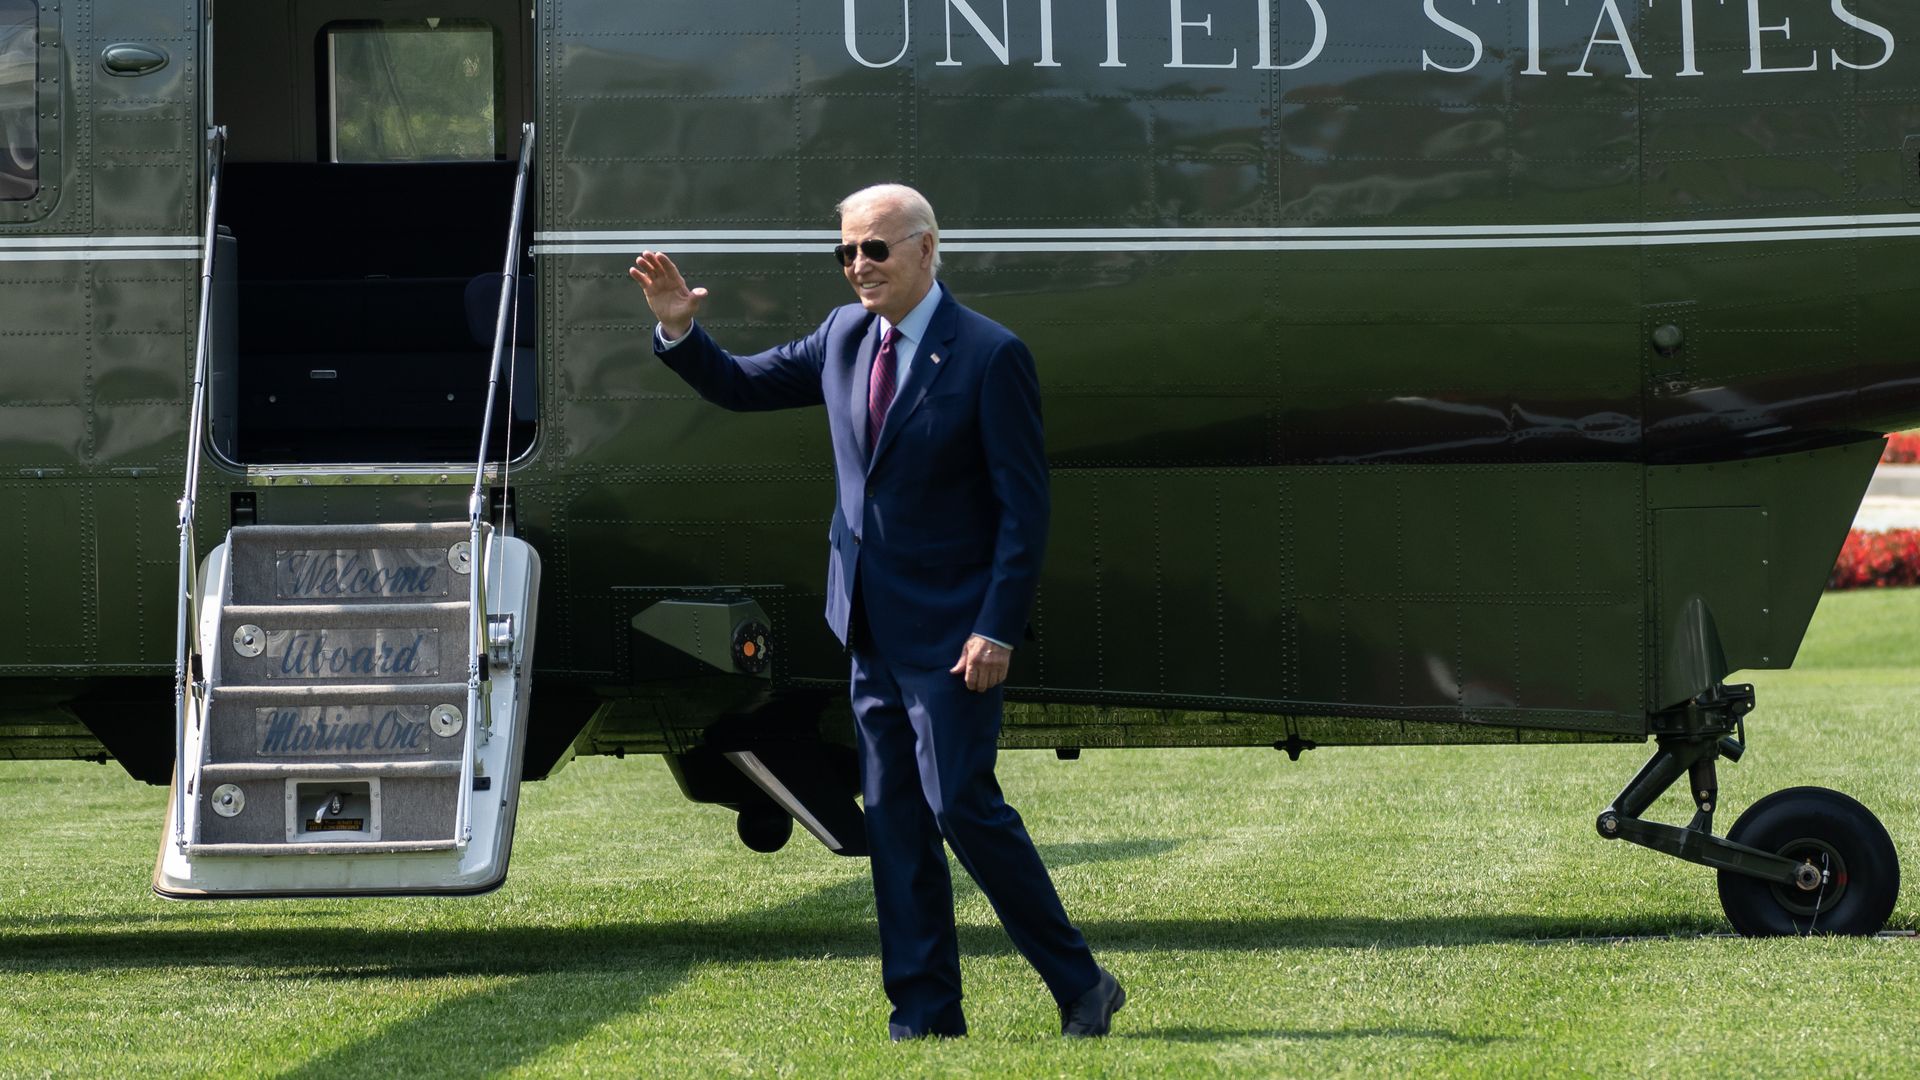 President Joe Biden walks on the South Lawn of the White House before boarding Maine One in Washington, DC, US, on Friday, July 28, 2023.